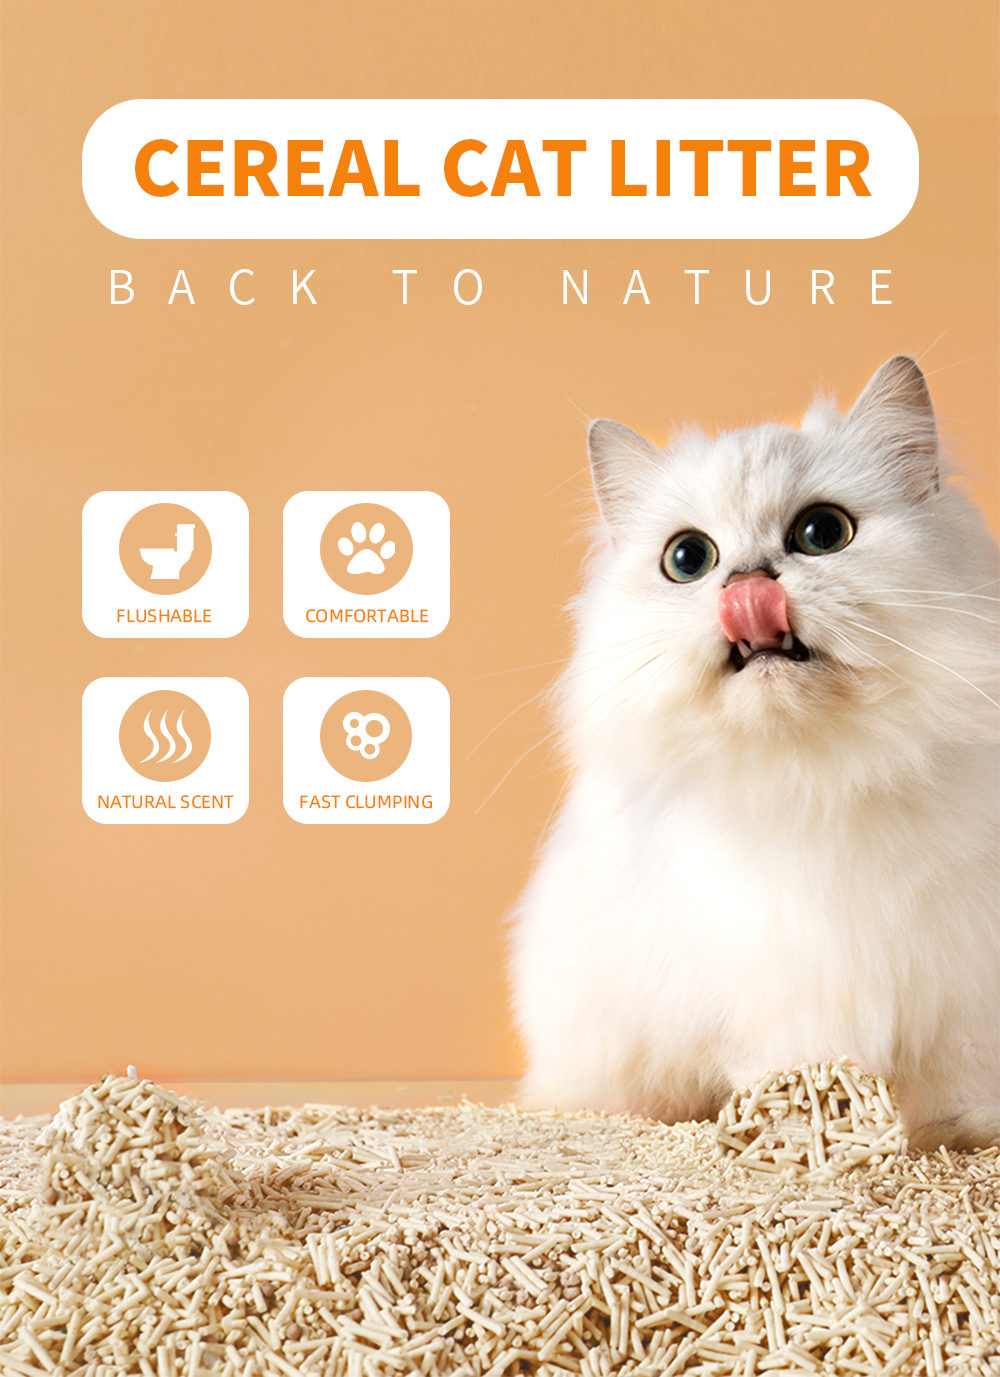 Cereal cat litter with natural grain scent popular in US